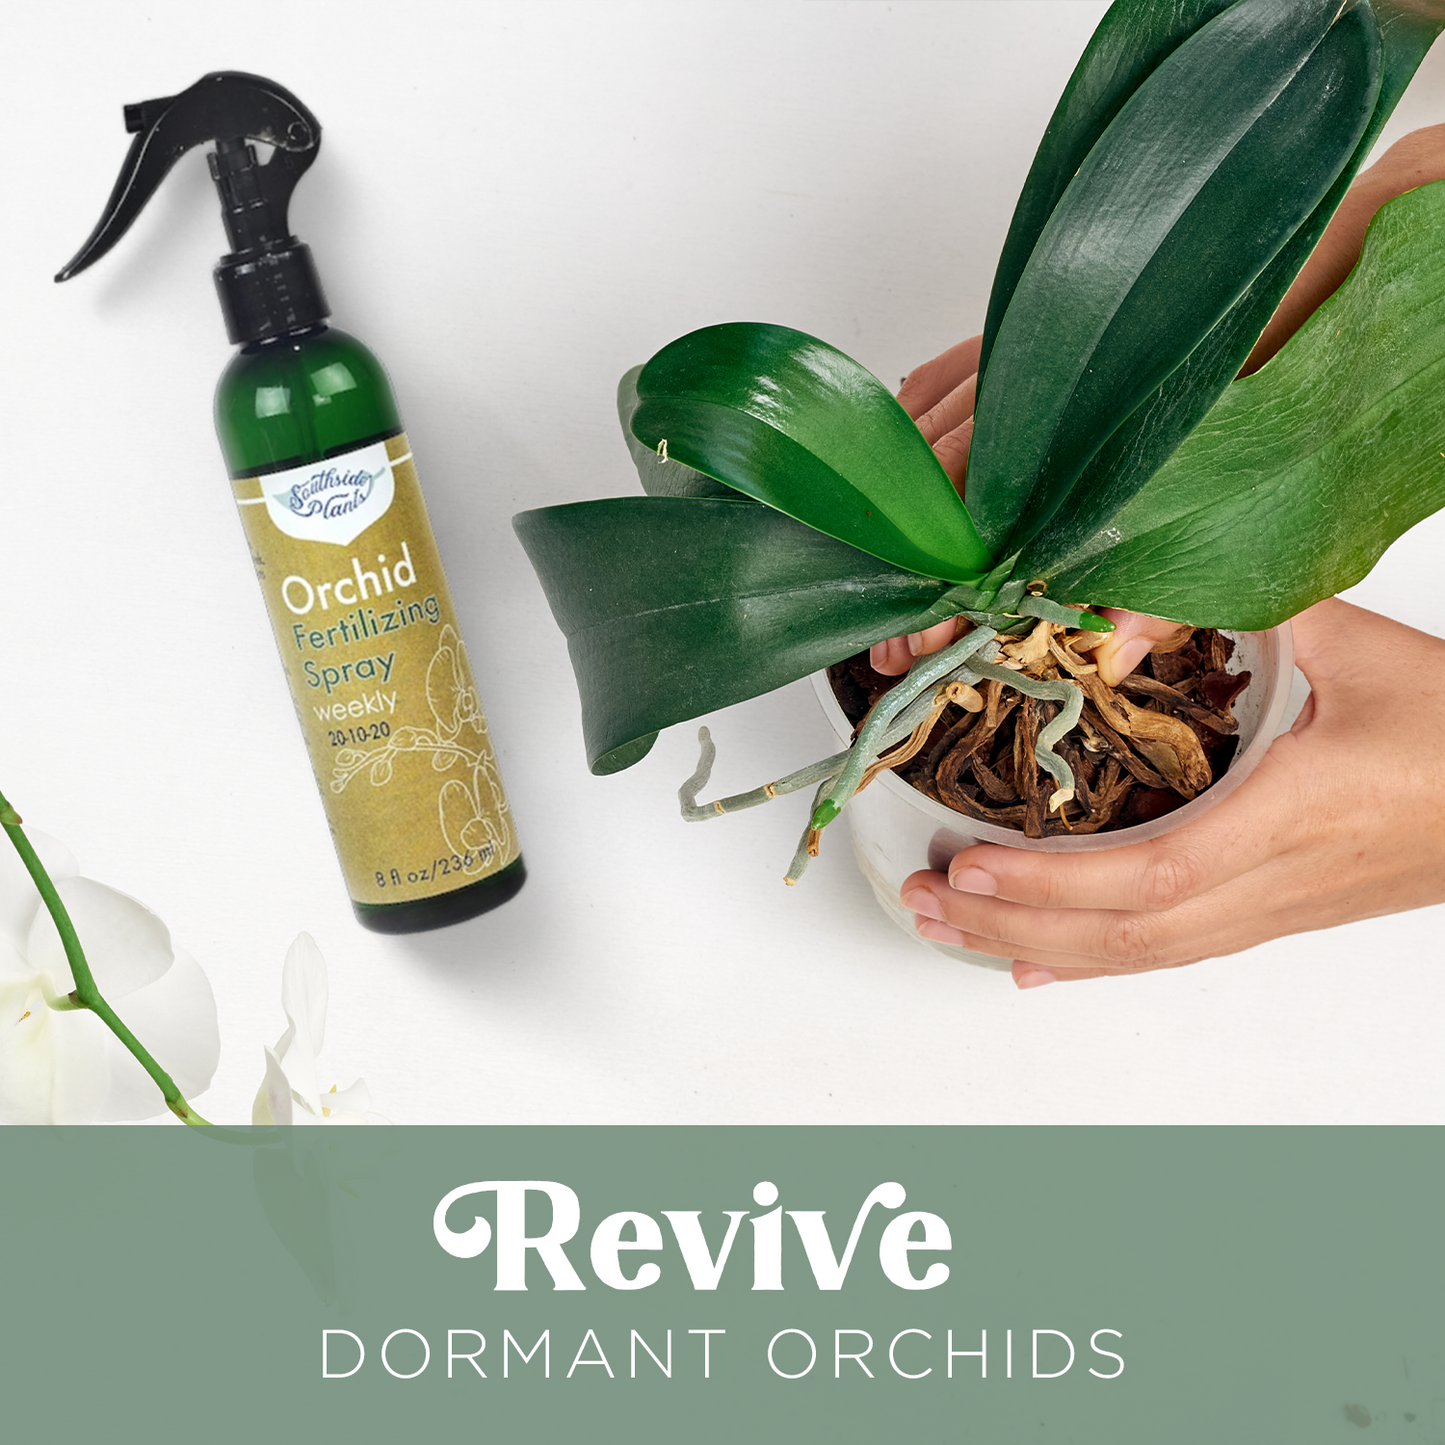 Orchid Fertilizing & Blooming Sprays